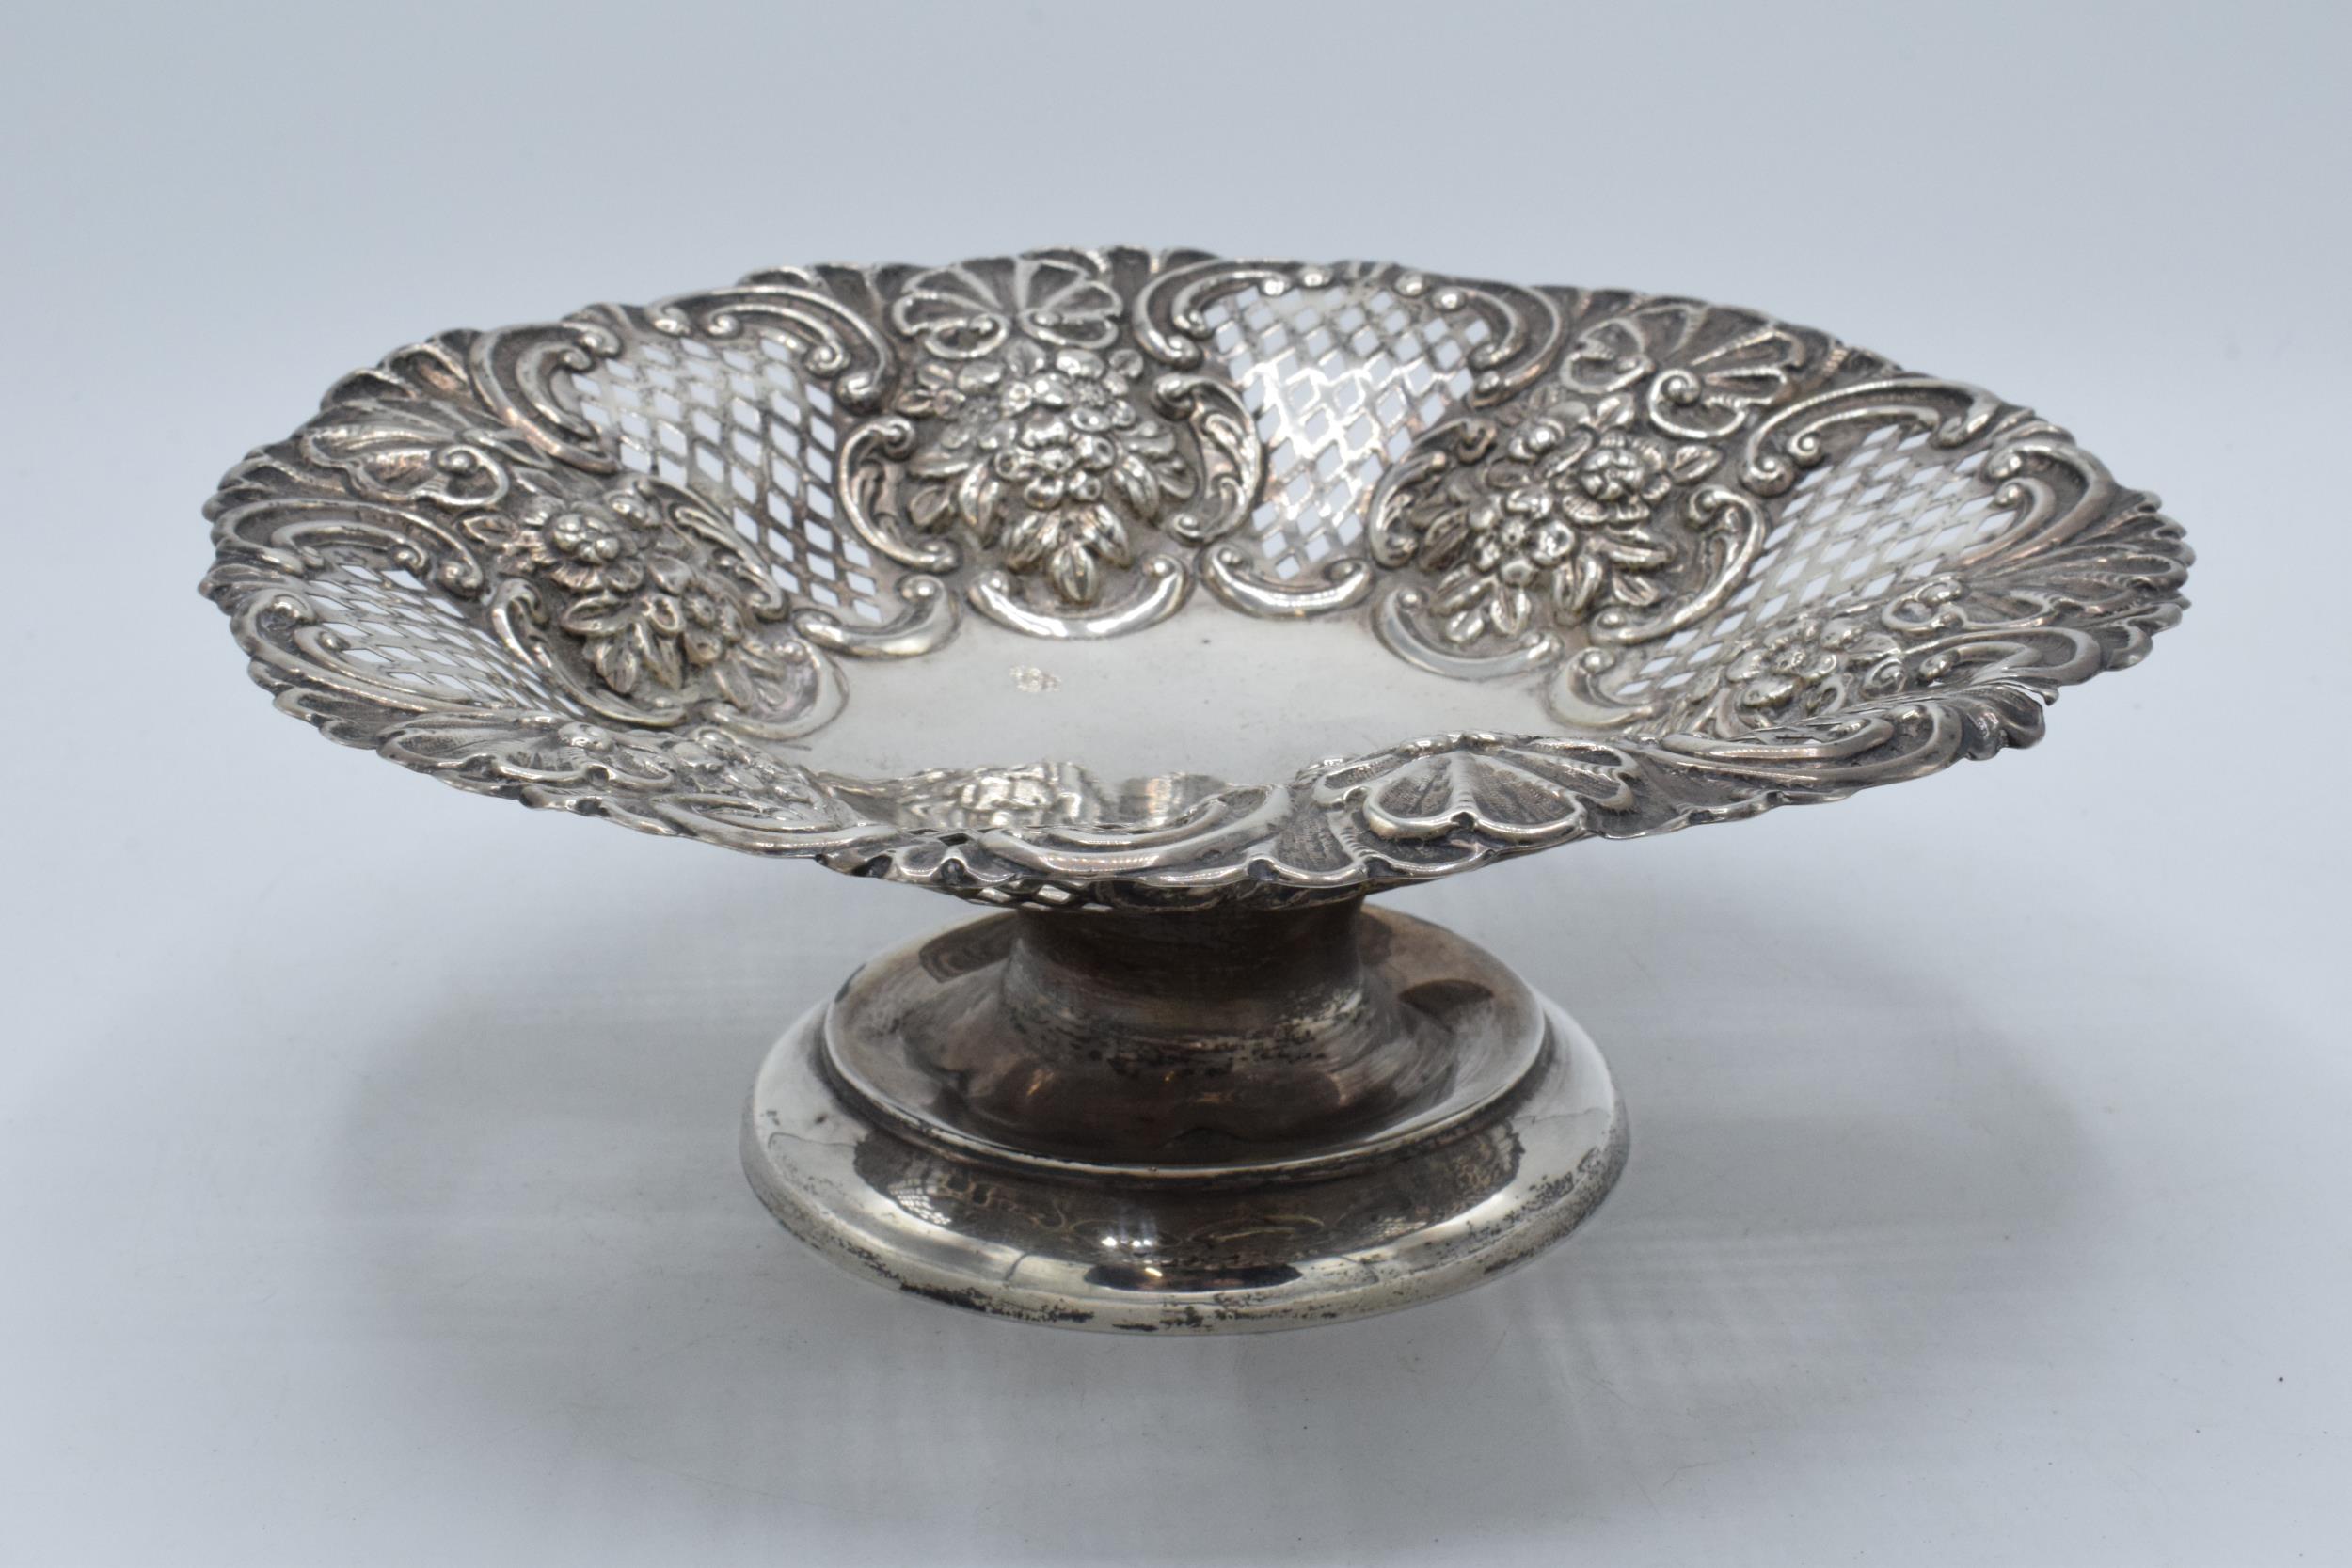 A silver pedestal dish with repousse decoration, Chester 1902, 272.2 grams. 23cm wide.